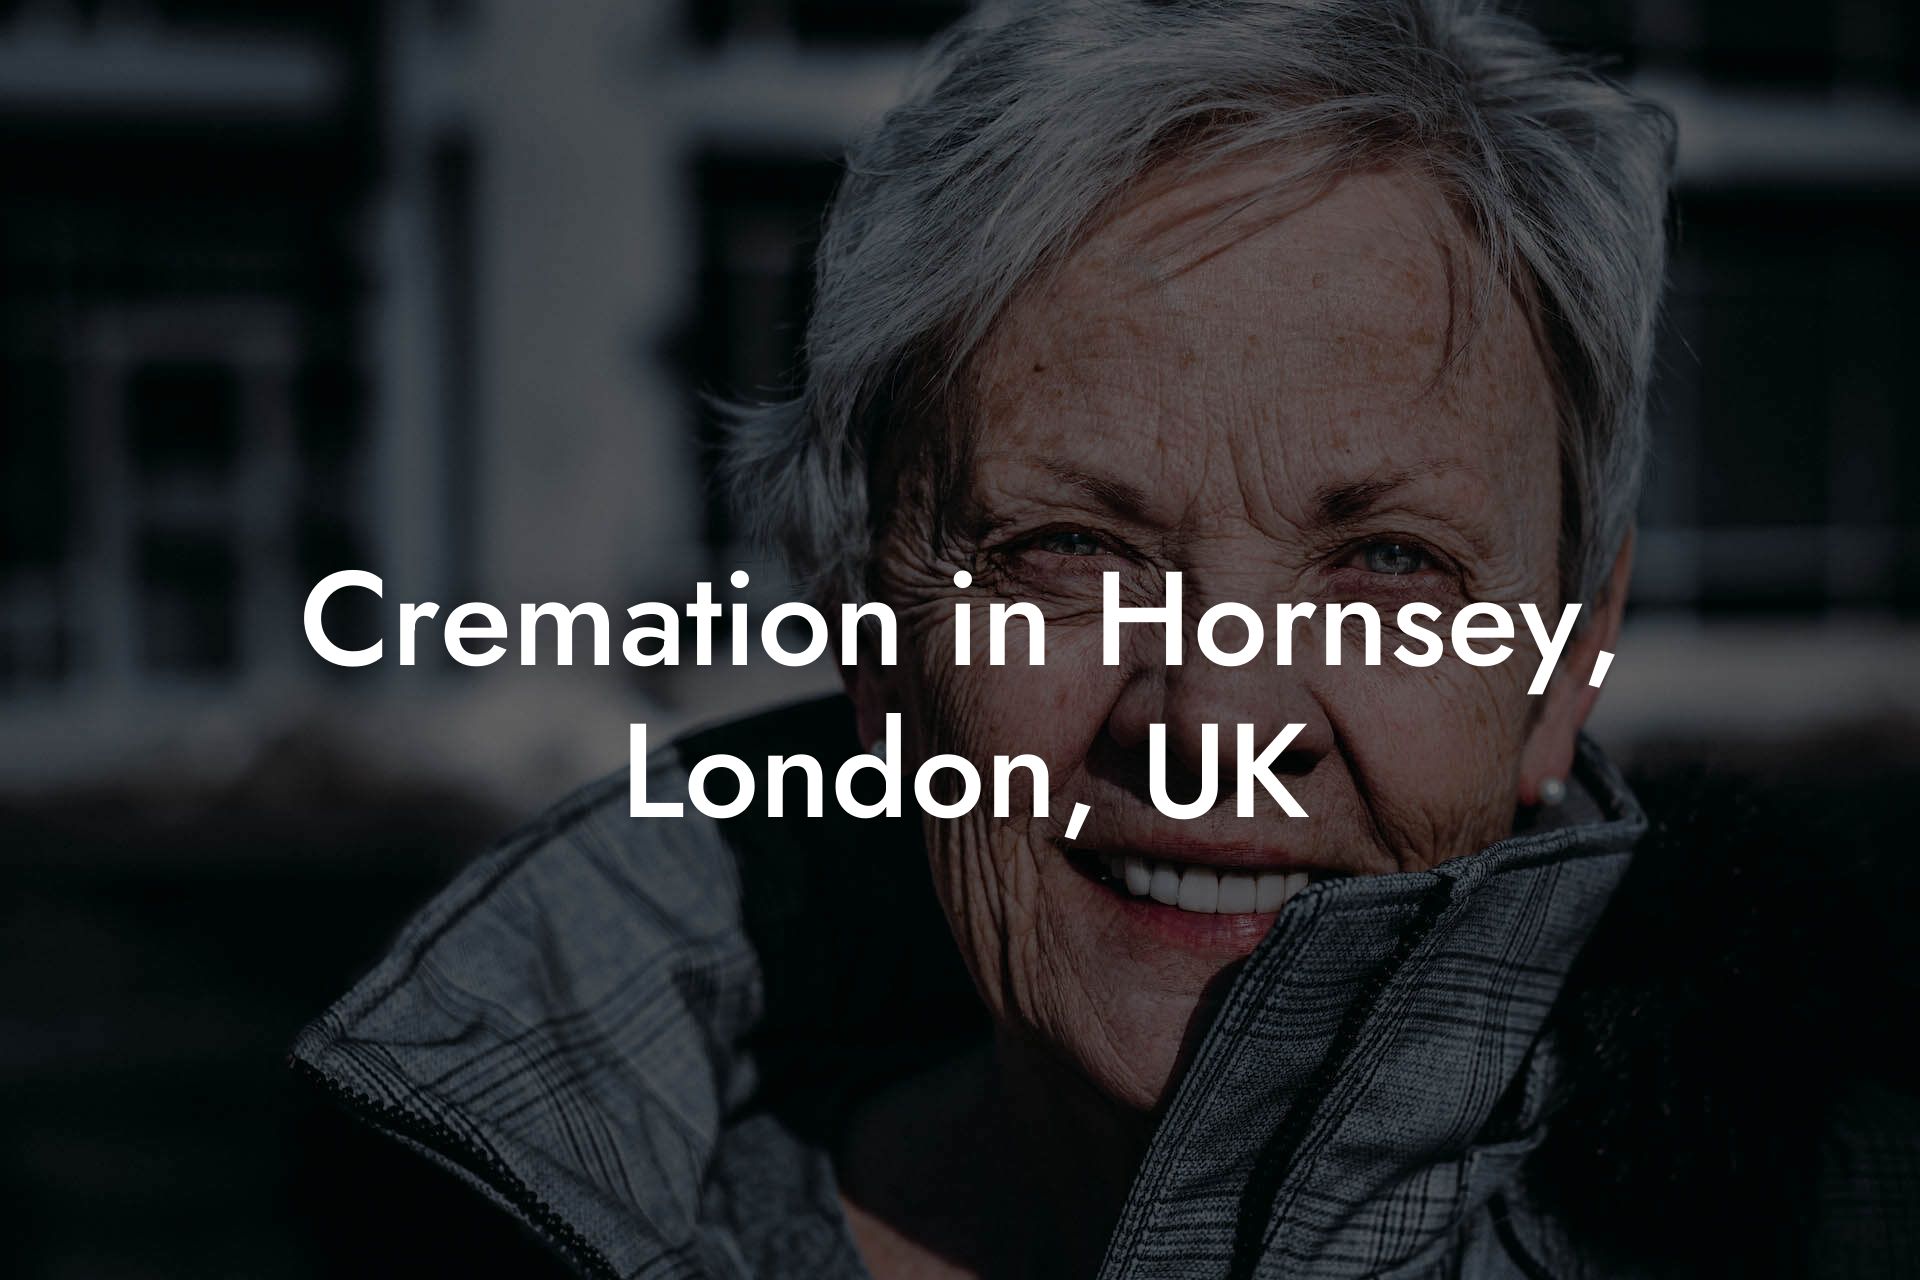 Cremation in Hornsey, London, UK